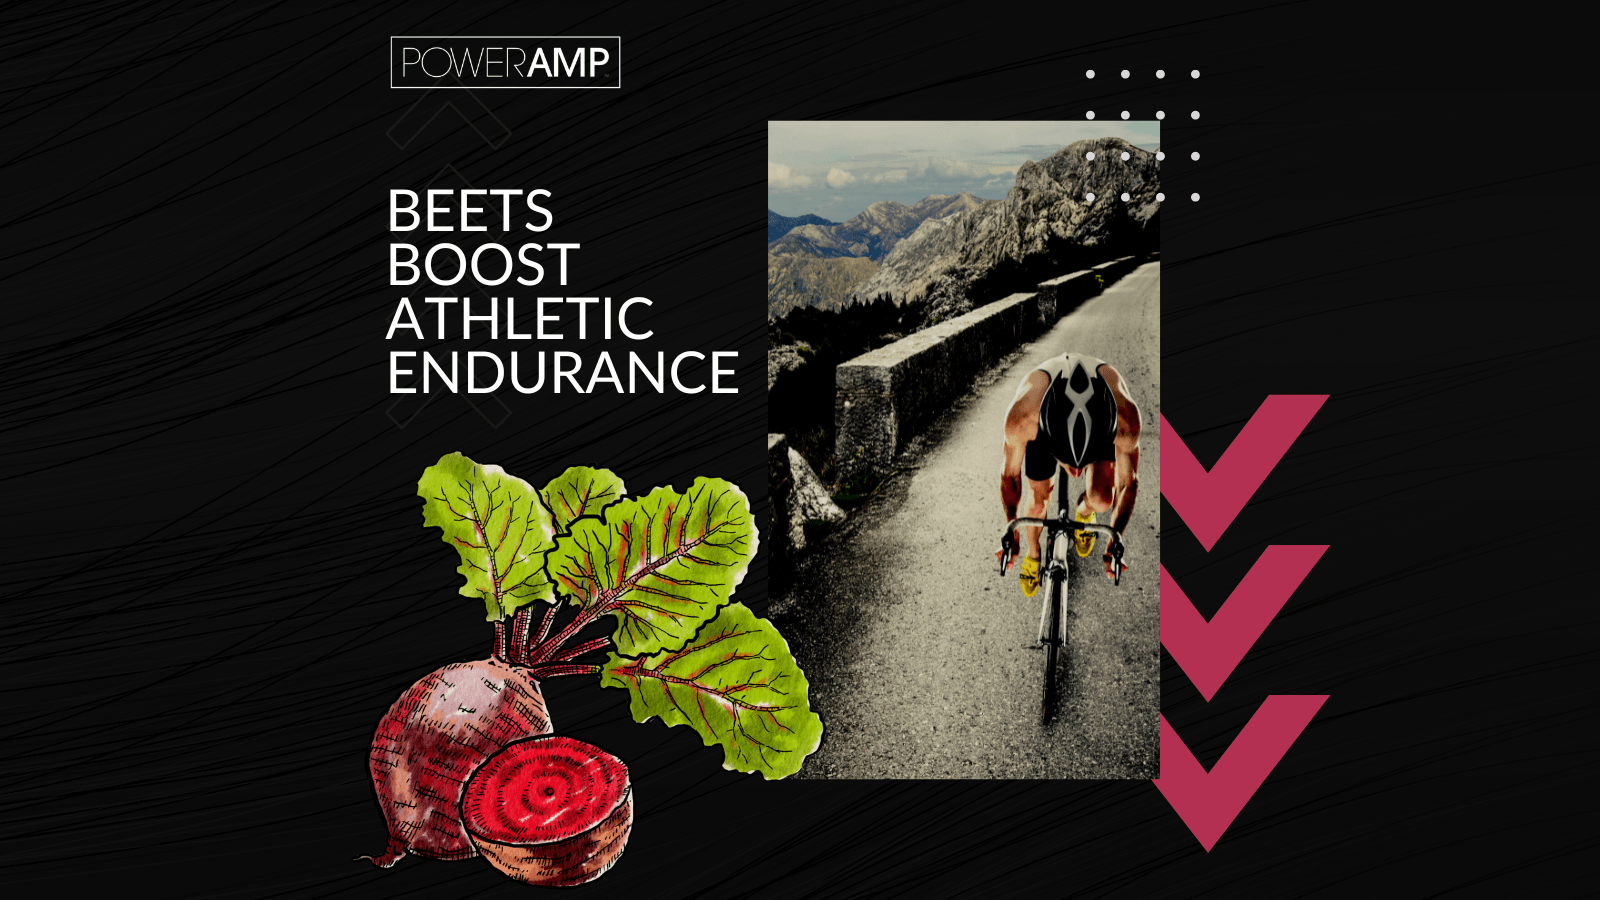 Beets Boost Athletic Endurance